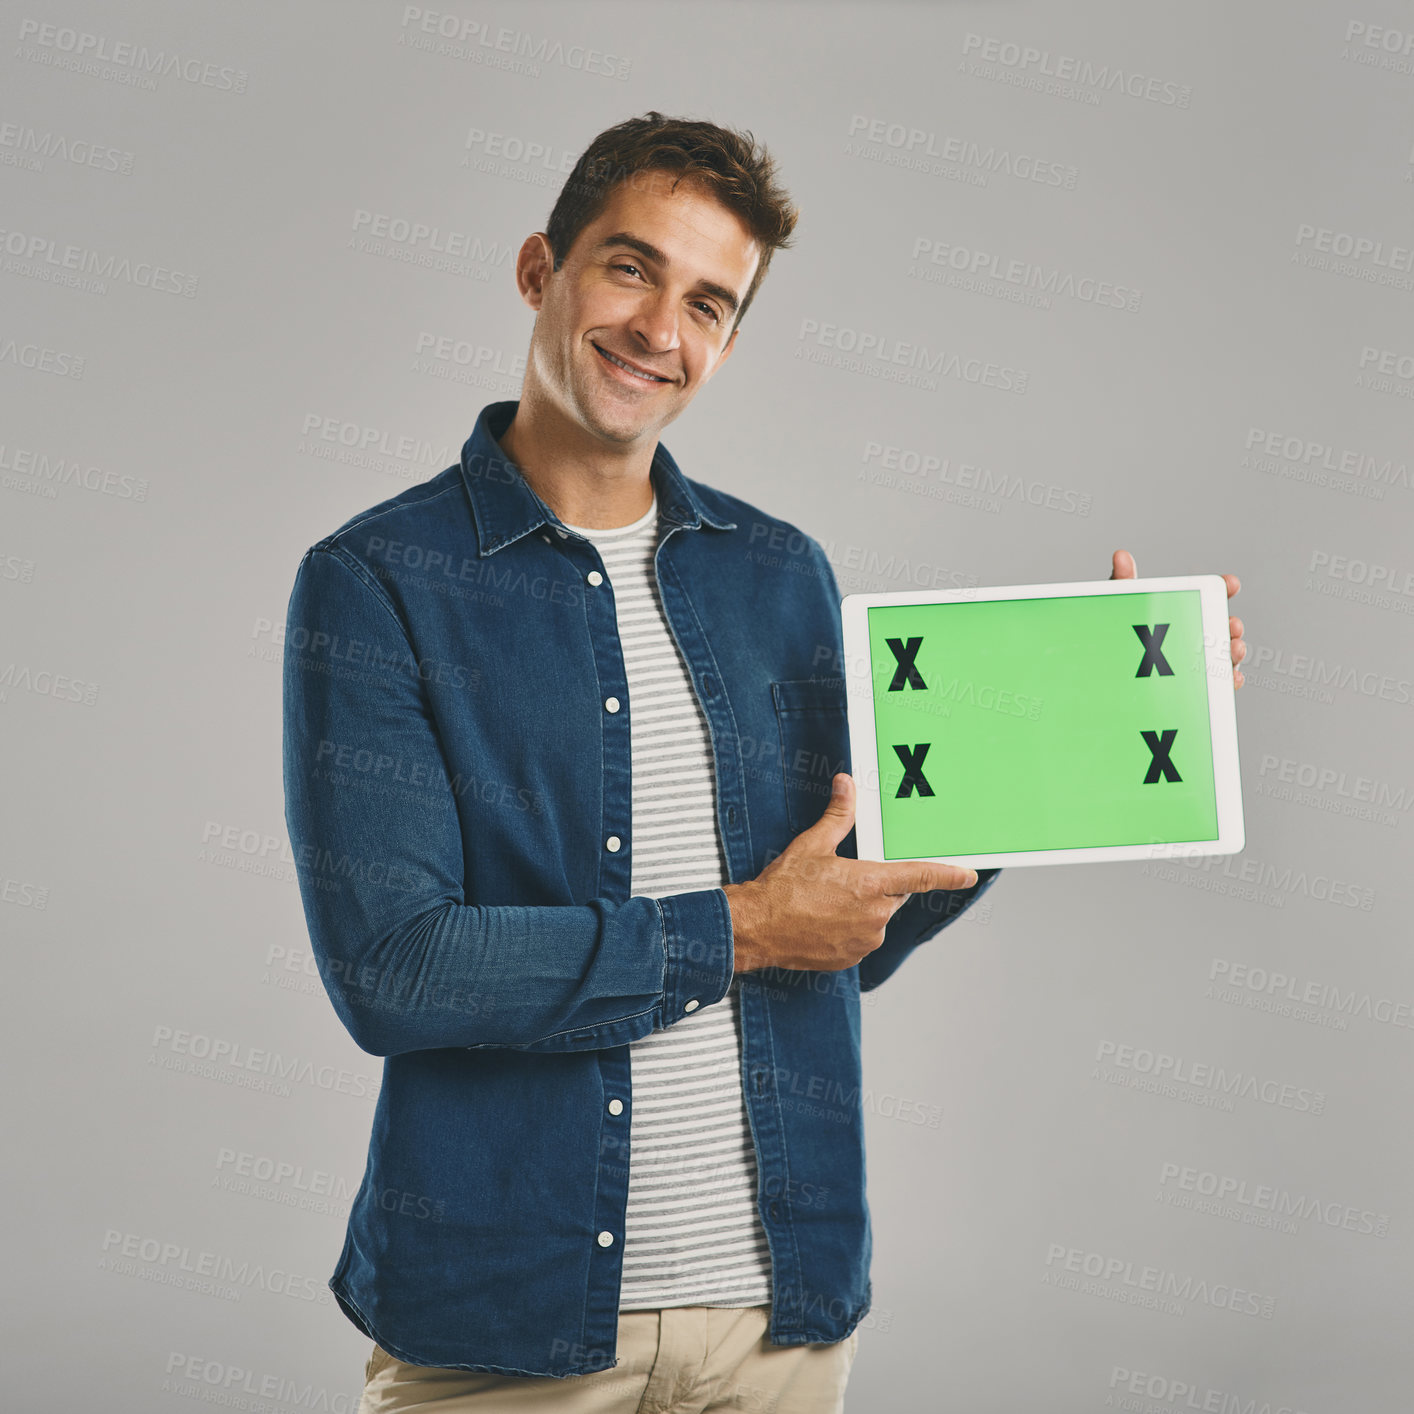 Buy stock photo Studio portrait of a young man holding a digital tablet with a green screen against a grey background